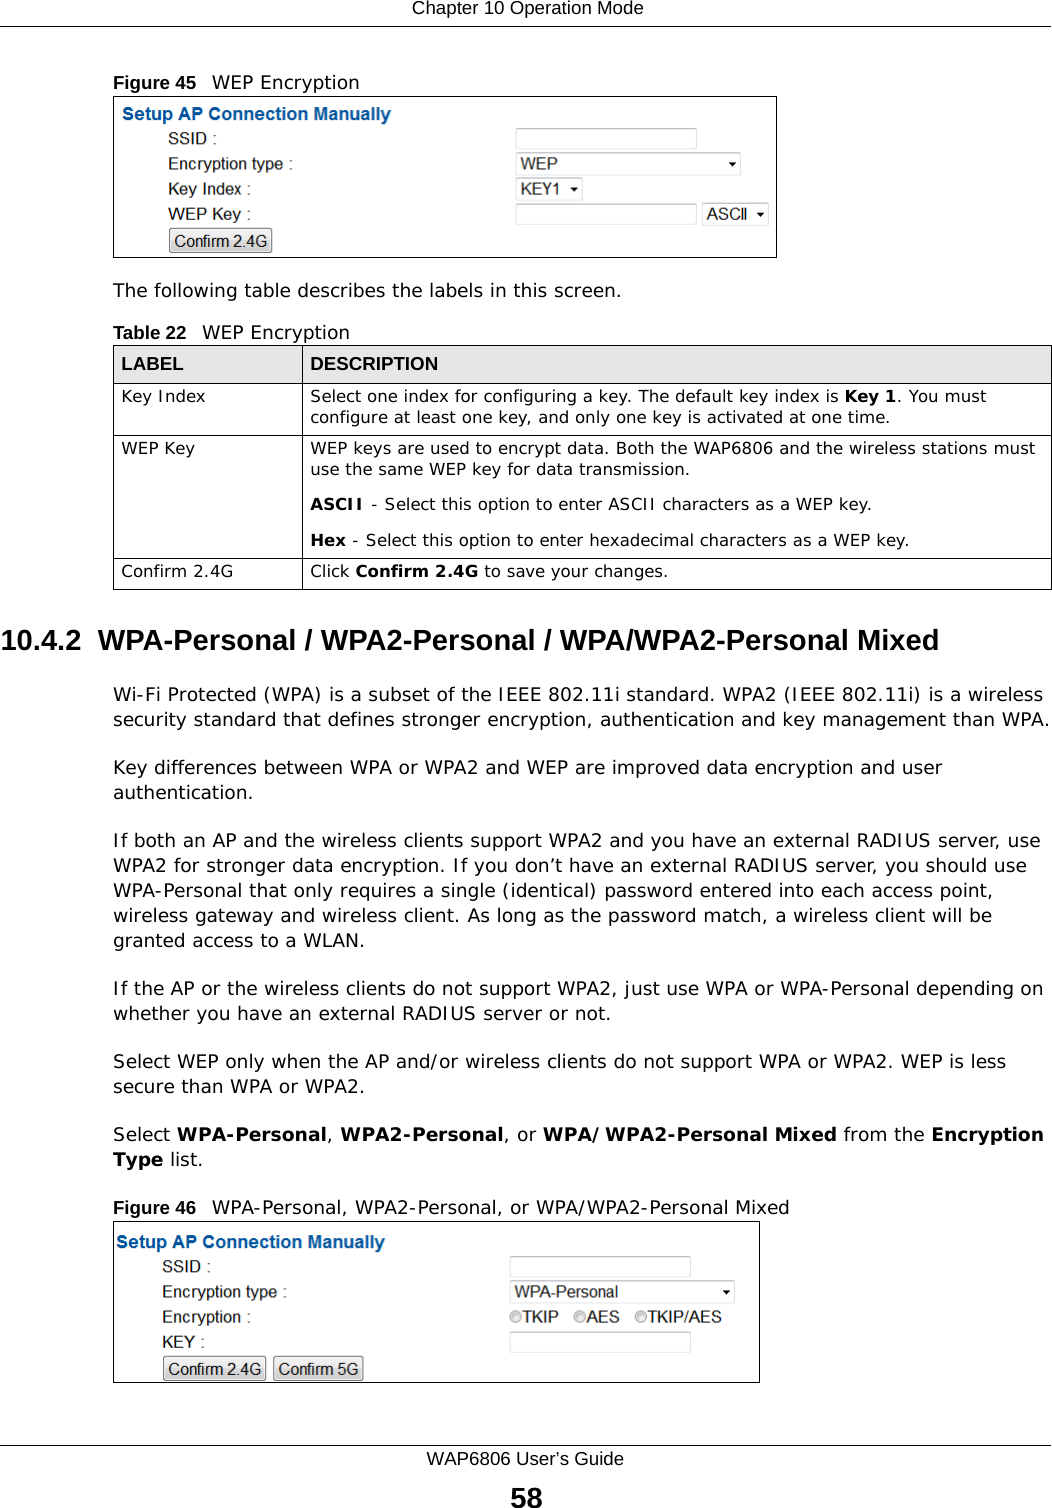  Chapter 10 Operation ModeWAP6806 User’s Guide58Figure 45   WEP Encryption The following table describes the labels in this screen.10.4.2  WPA-Personal / WPA2-Personal / WPA/WPA2-Personal MixedWi-Fi Protected (WPA) is a subset of the IEEE 802.11i standard. WPA2 (IEEE 802.11i) is a wireless security standard that defines stronger encryption, authentication and key management than WPA.Key differences between WPA or WPA2 and WEP are improved data encryption and user authentication.If both an AP and the wireless clients support WPA2 and you have an external RADIUS server, use WPA2 for stronger data encryption. If you don’t have an external RADIUS server, you should use WPA-Personal that only requires a single (identical) password entered into each access point, wireless gateway and wireless client. As long as the password match, a wireless client will be granted access to a WLAN.If the AP or the wireless clients do not support WPA2, just use WPA or WPA-Personal depending on whether you have an external RADIUS server or not.Select WEP only when the AP and/or wireless clients do not support WPA or WPA2. WEP is less secure than WPA or WPA2.Select WPA-Personal, WPA2-Personal, or WPA/WPA2-Personal Mixed from the Encryption Type list.Figure 46   WPA-Personal, WPA2-Personal, or WPA/WPA2-Personal Mixed Table 22   WEP EncryptionLABEL DESCRIPTIONKey Index Select one index for configuring a key. The default key index is Key 1. You must configure at least one key, and only one key is activated at one time.WEP Key WEP keys are used to encrypt data. Both the WAP6806 and the wireless stations must use the same WEP key for data transmission.ASCII - Select this option to enter ASCII characters as a WEP key.Hex - Select this option to enter hexadecimal characters as a WEP key.Confirm 2.4G Click Confirm 2.4G to save your changes.